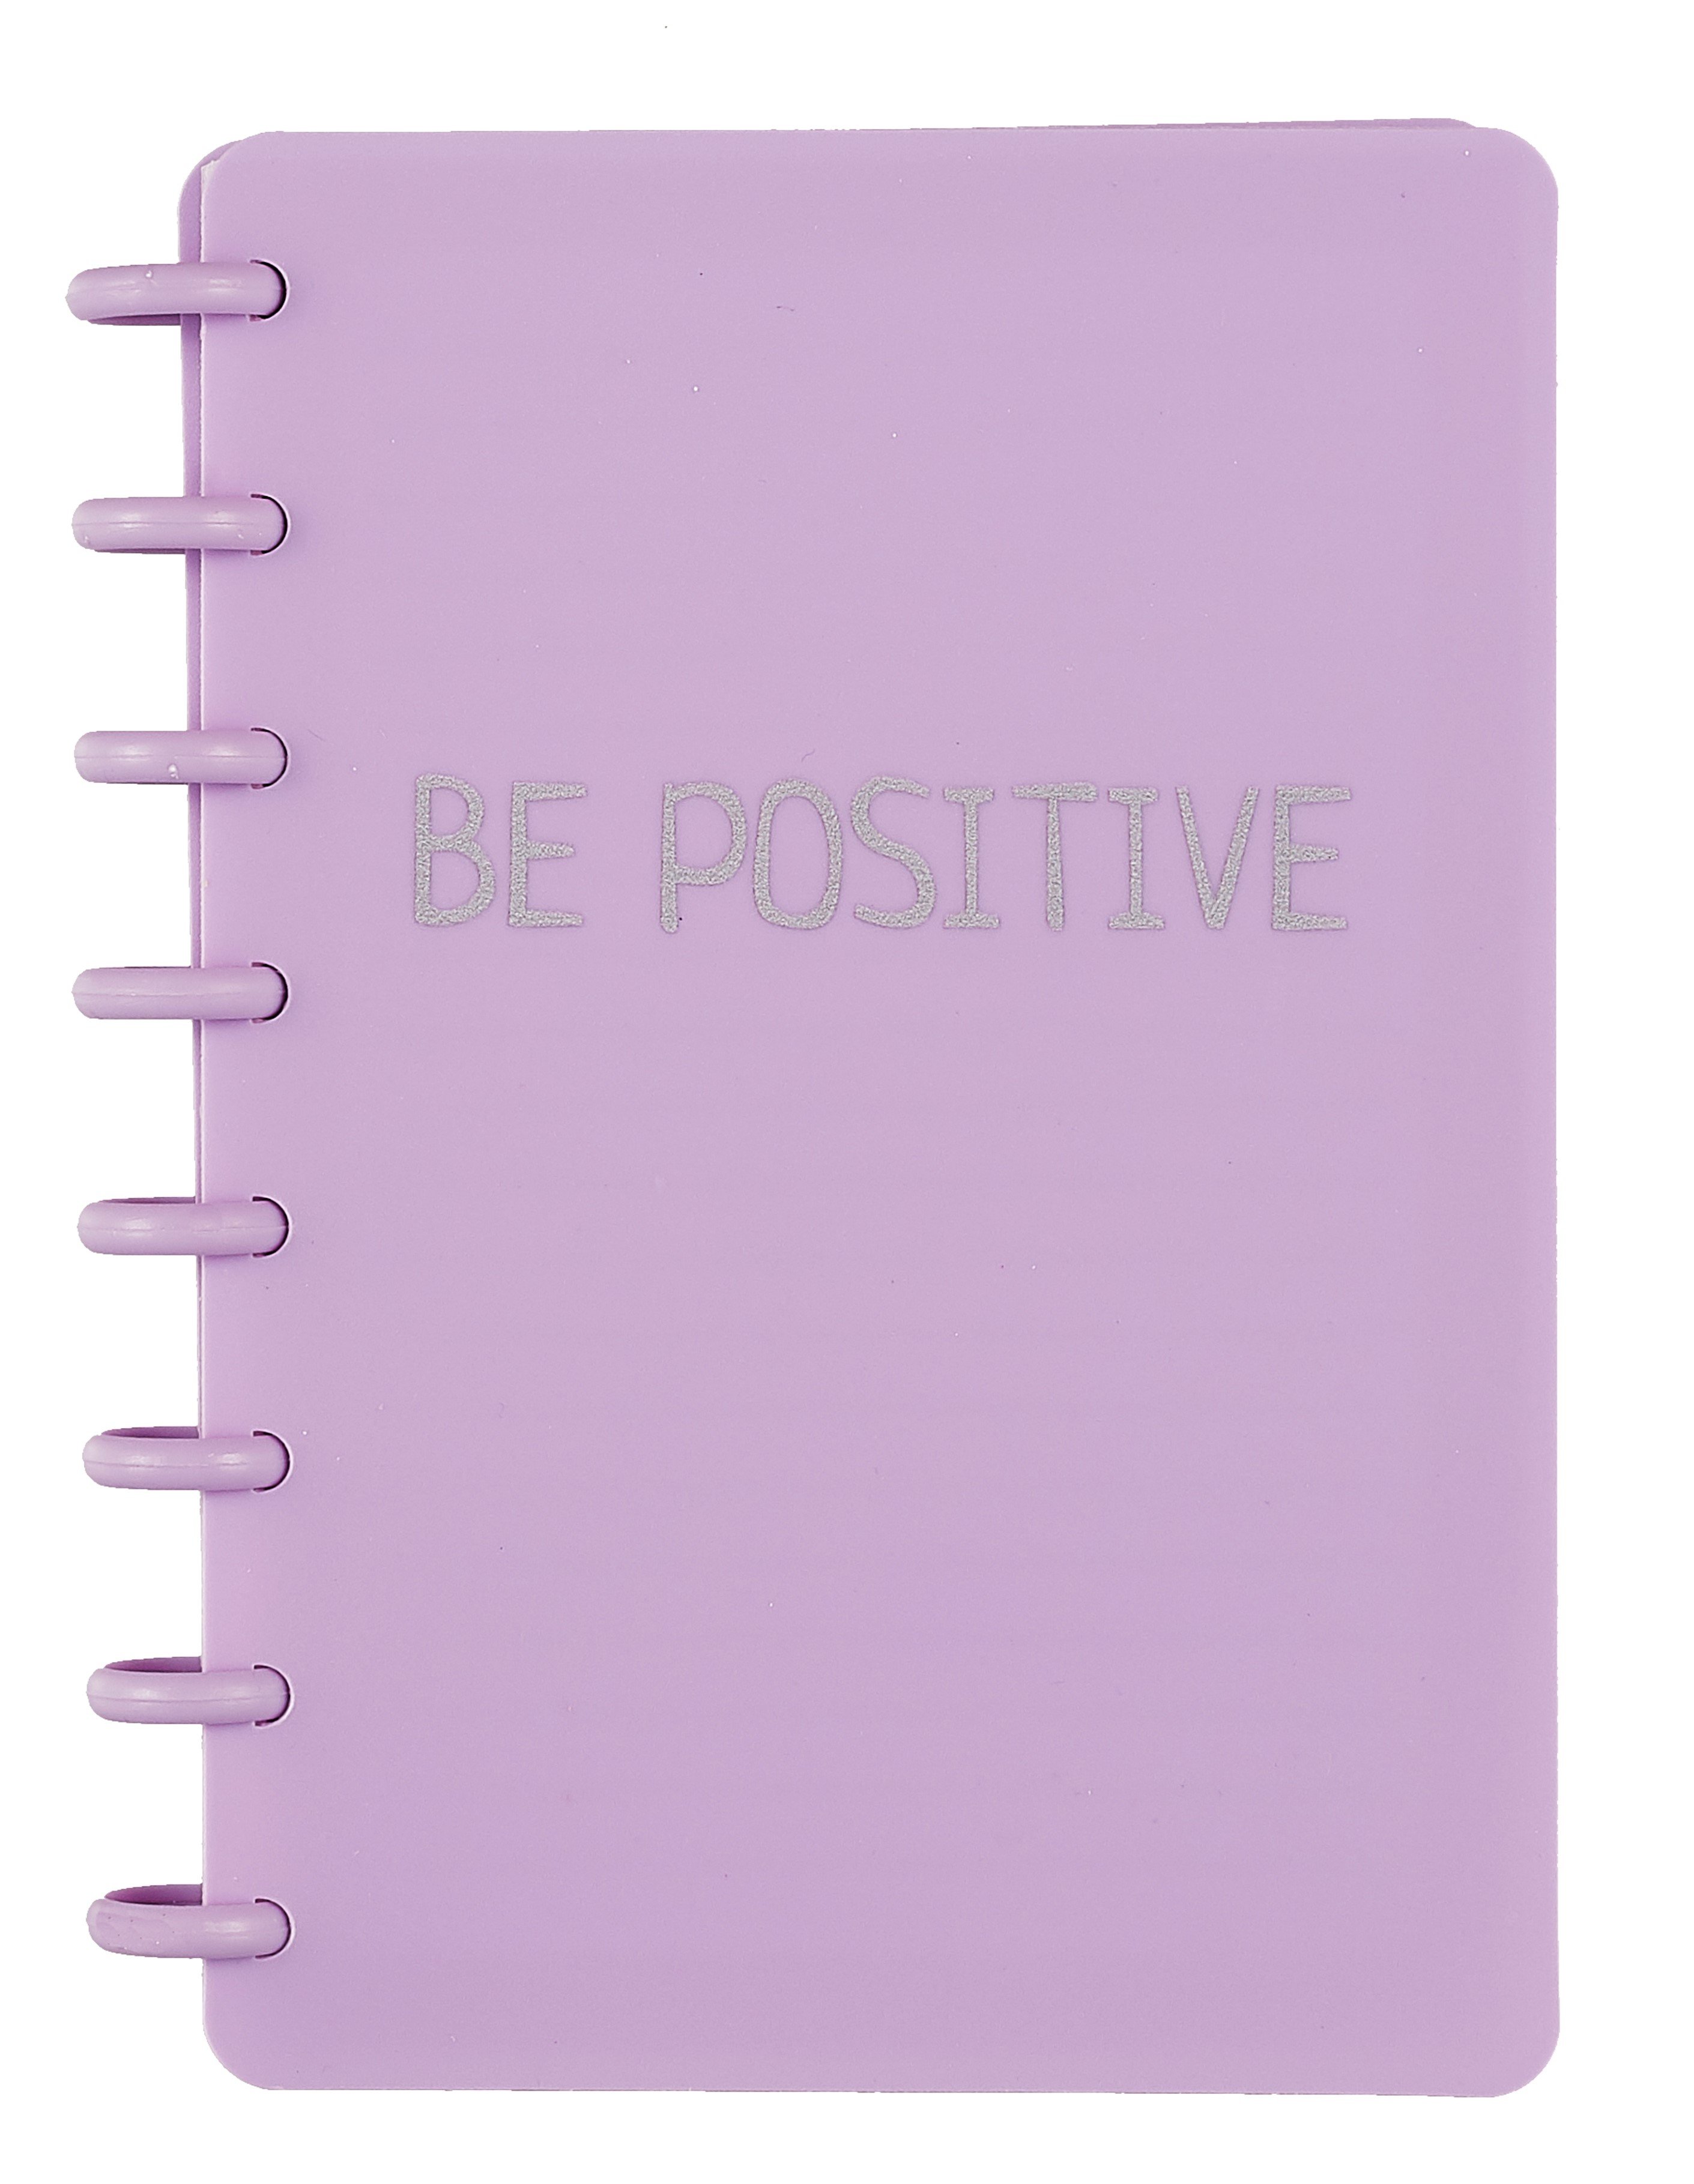  80 .  Be Positive   , 